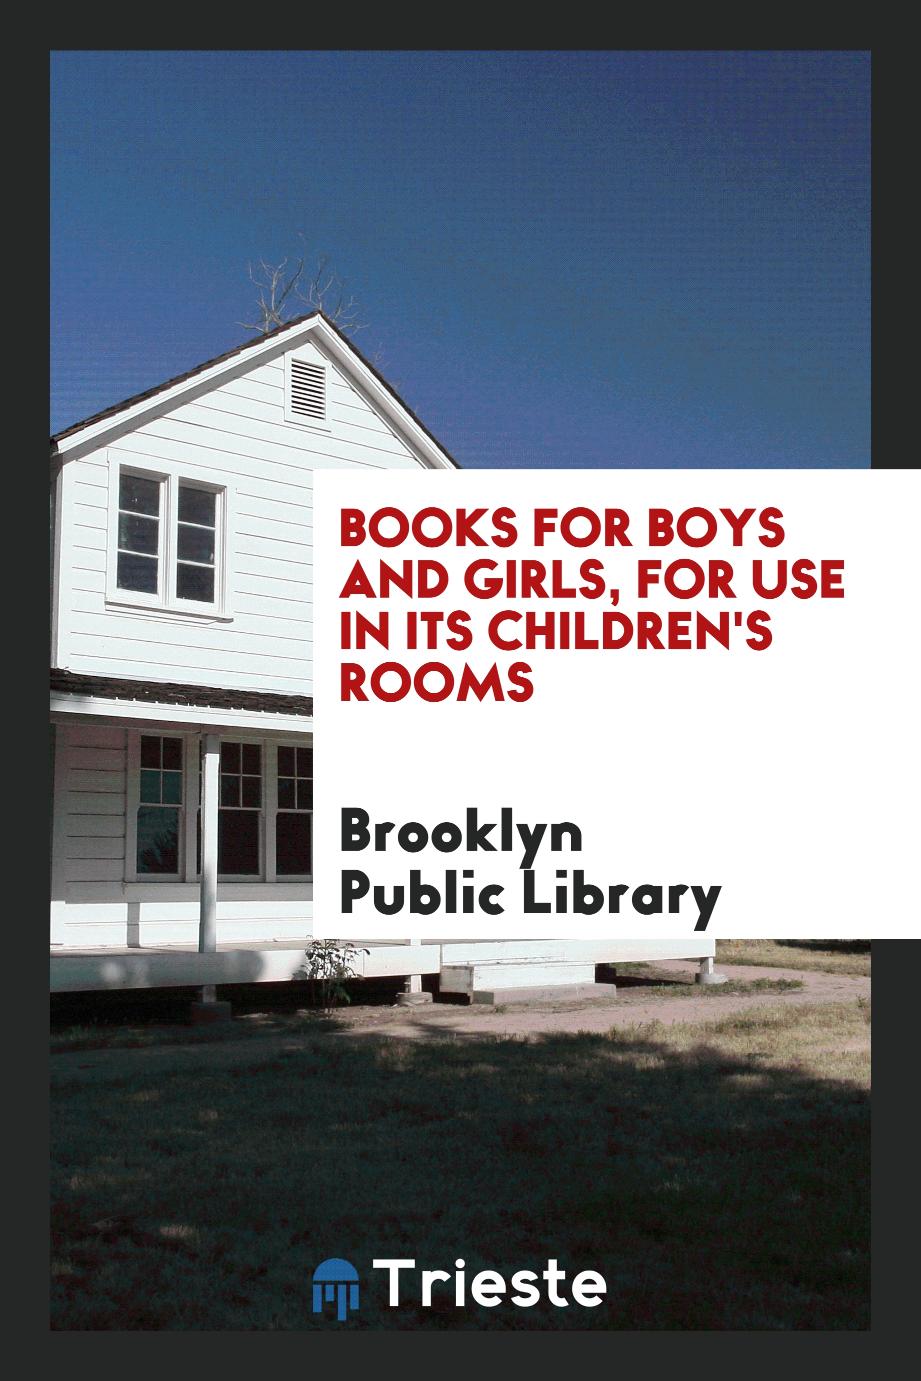 Books for boys and girls, for use in its children's rooms